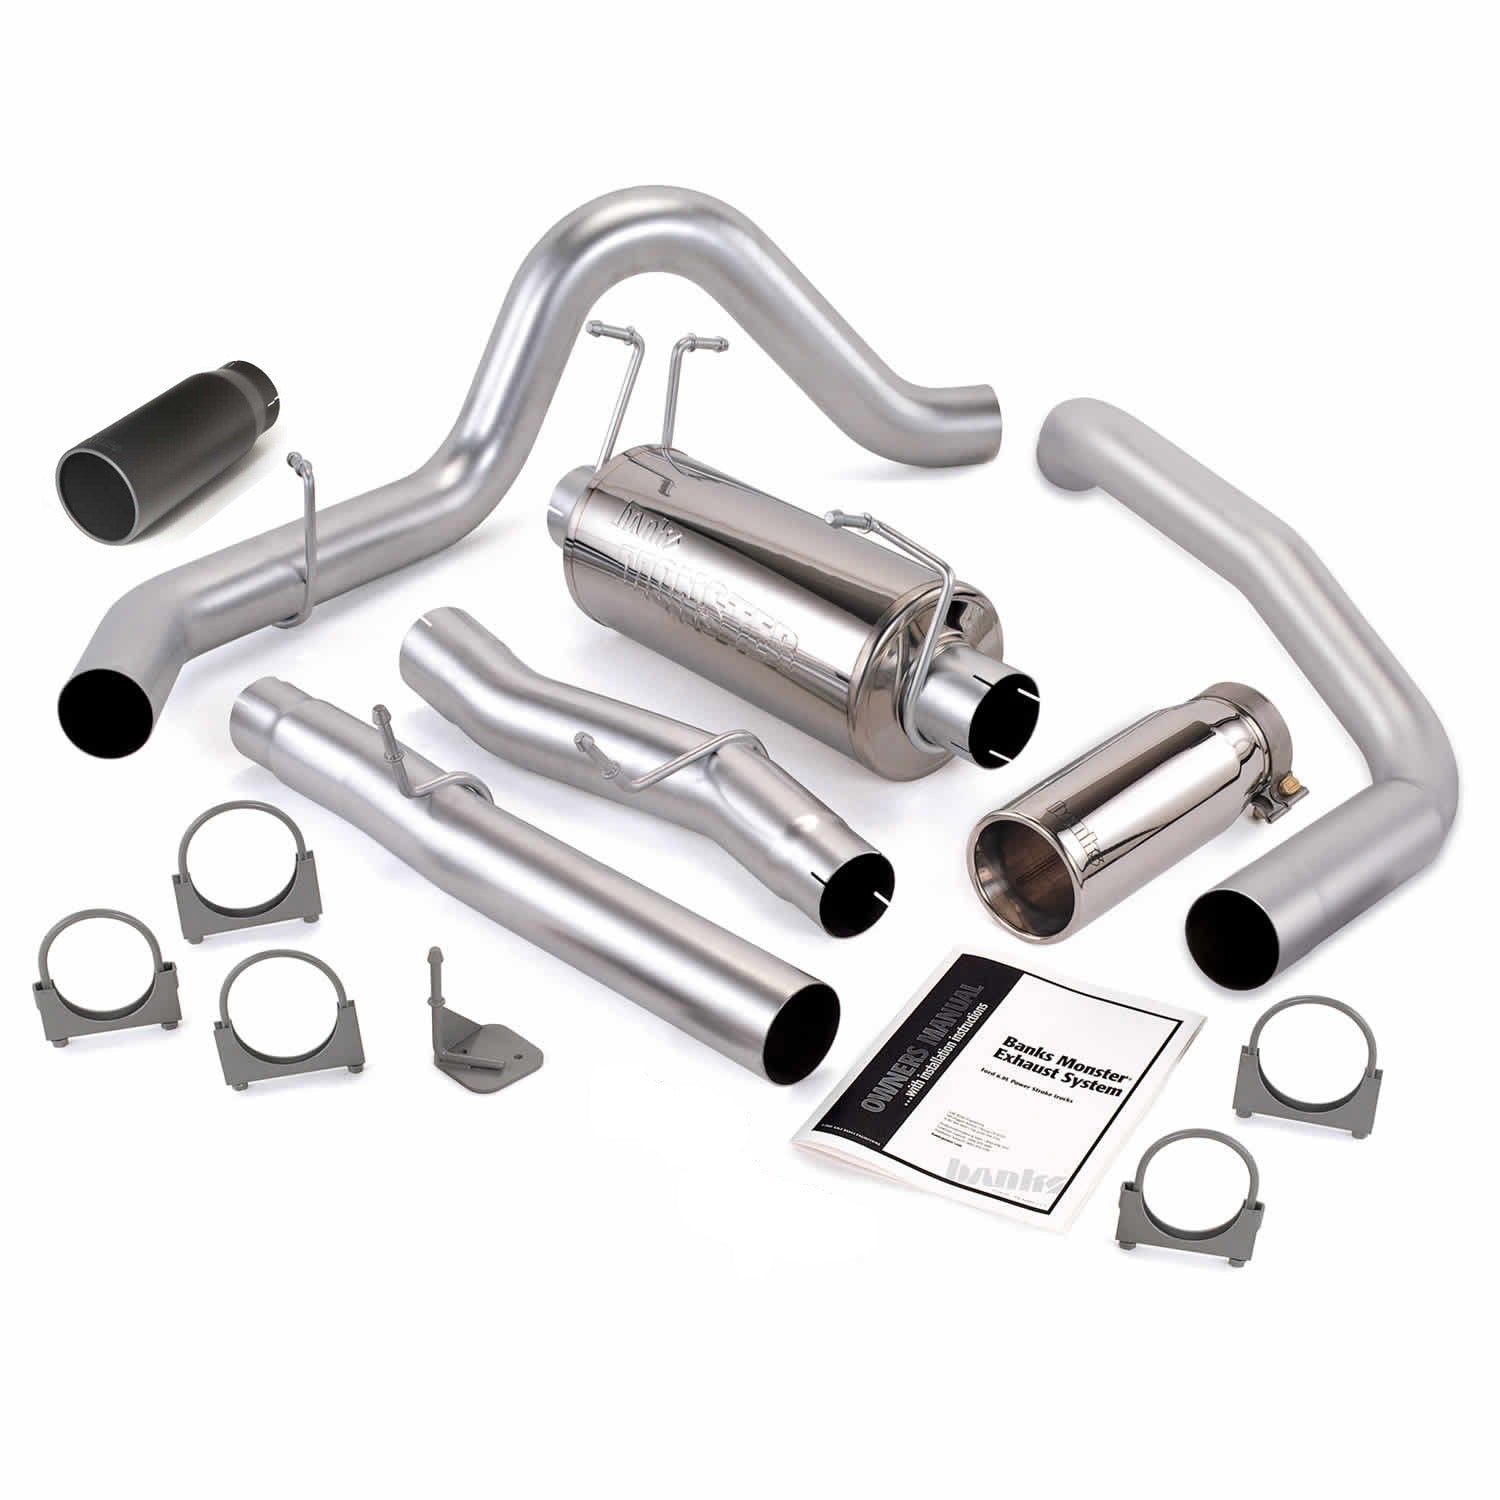 Monster Exhaust 48786-b and chrome